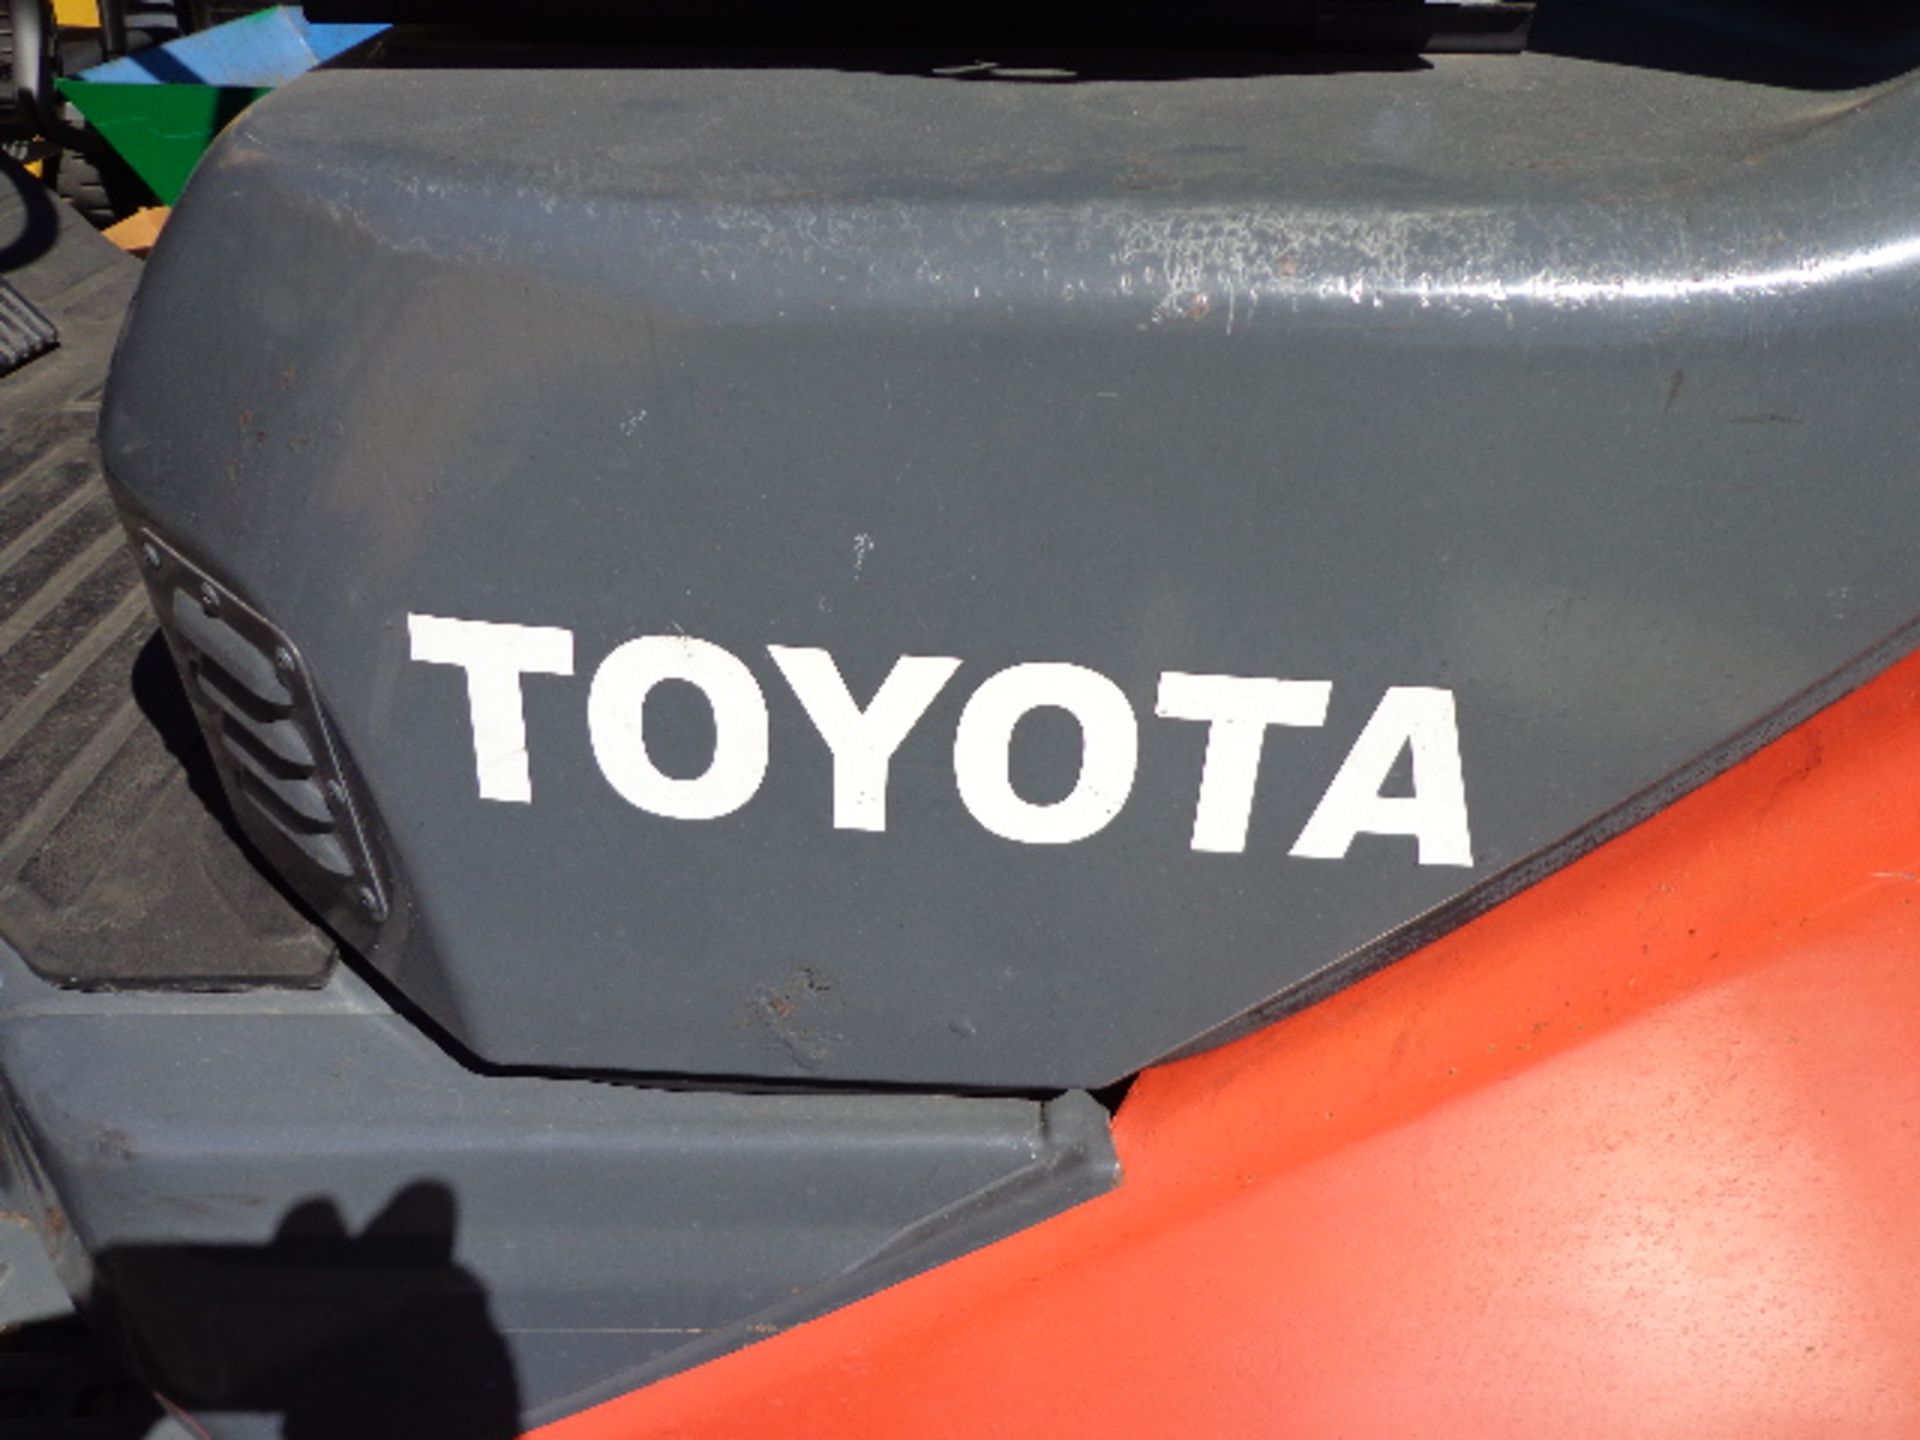 Toyota 8FGCU30 5000 Lb Cap LPG Forklift s/n 14600 w/ 3-Stage Mast, 198” Lift Height, SS, SOLD AS IS - Image 7 of 11